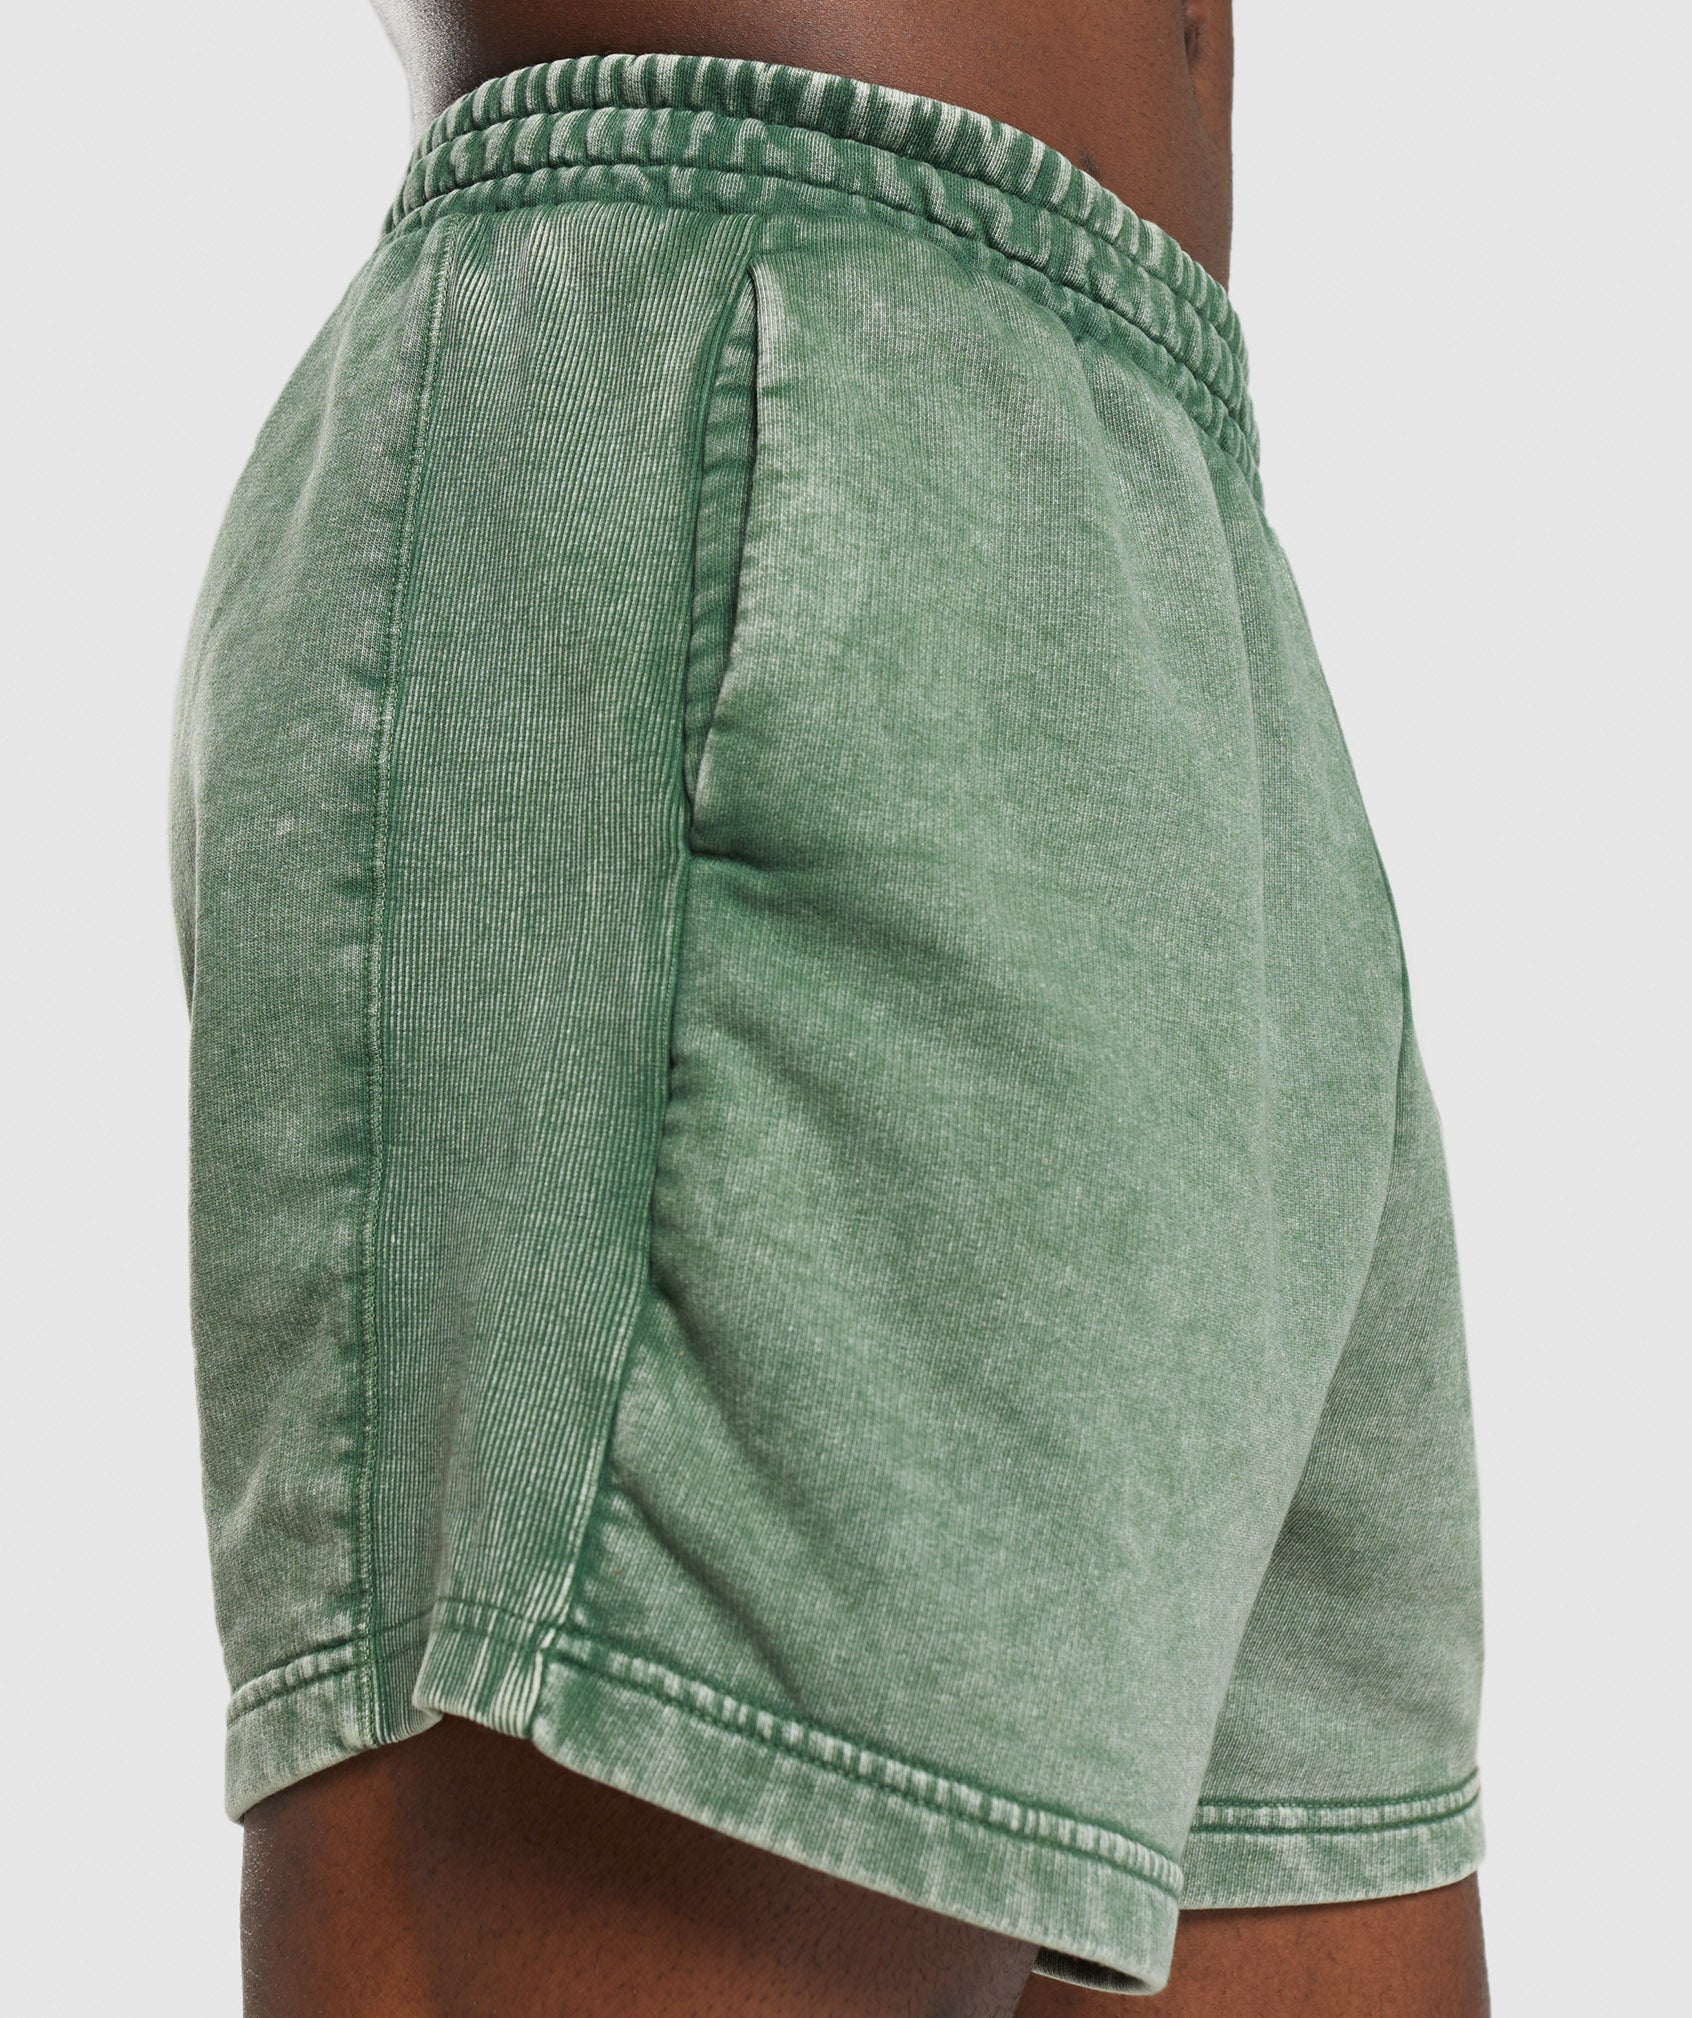 Power Washed 5" Shorts in Iguana Green - view 6